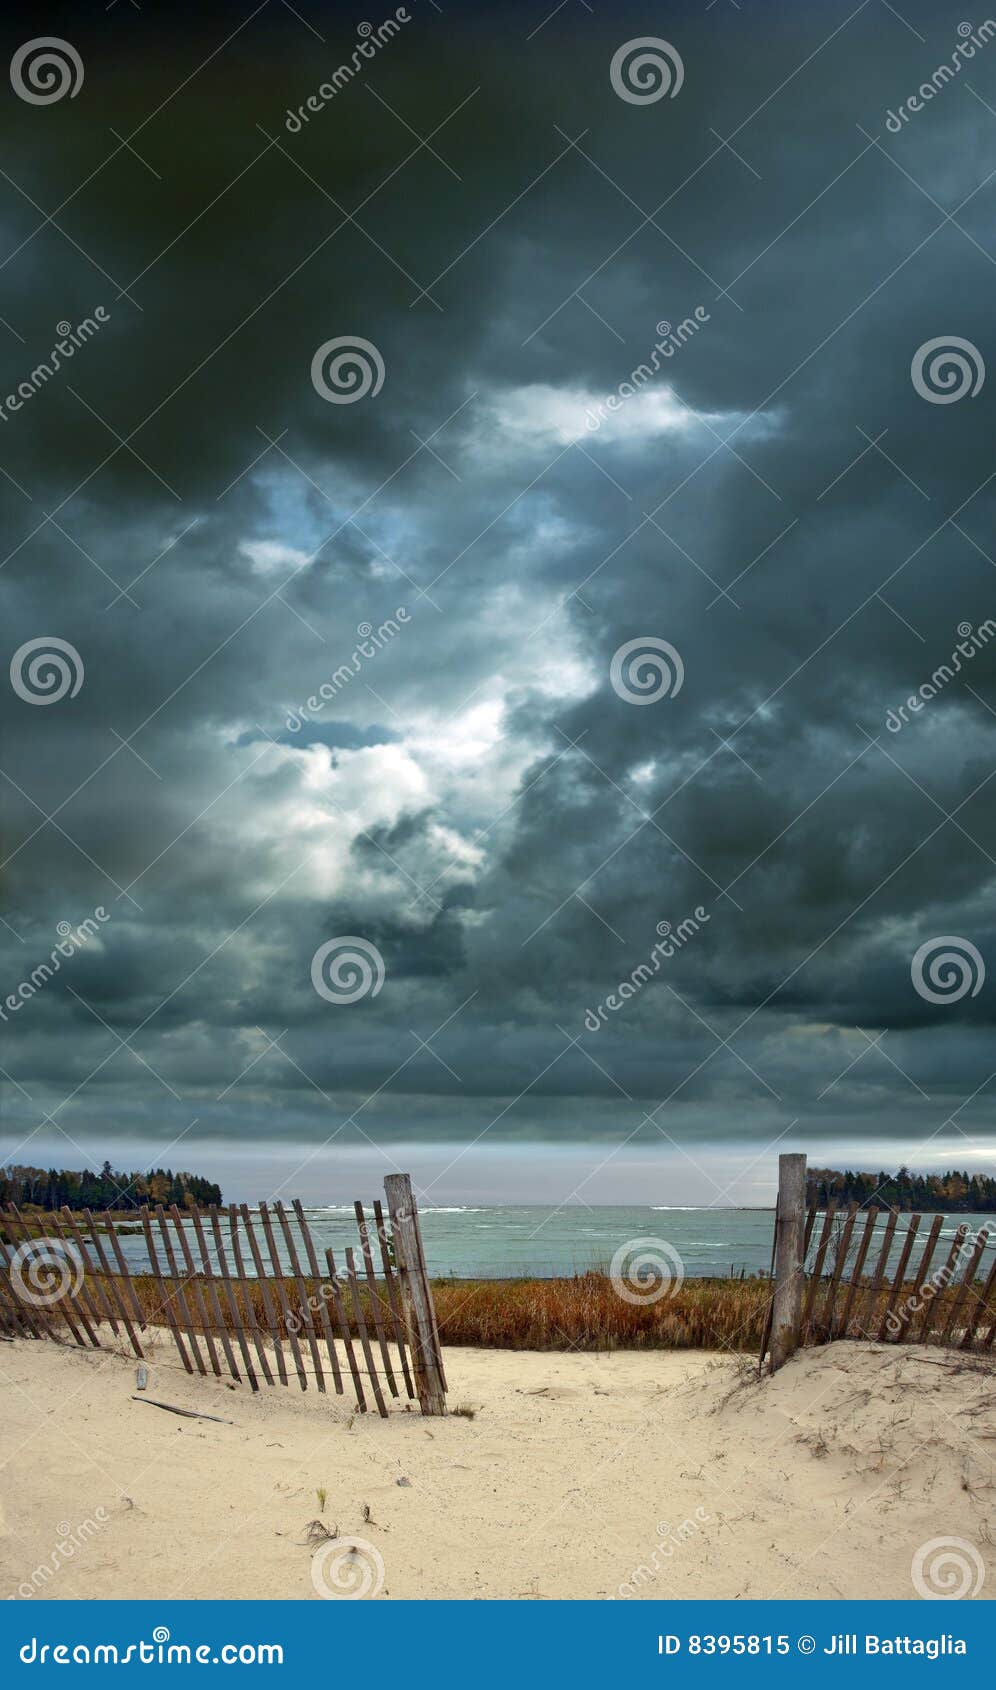 stormy sky at the beach with fence